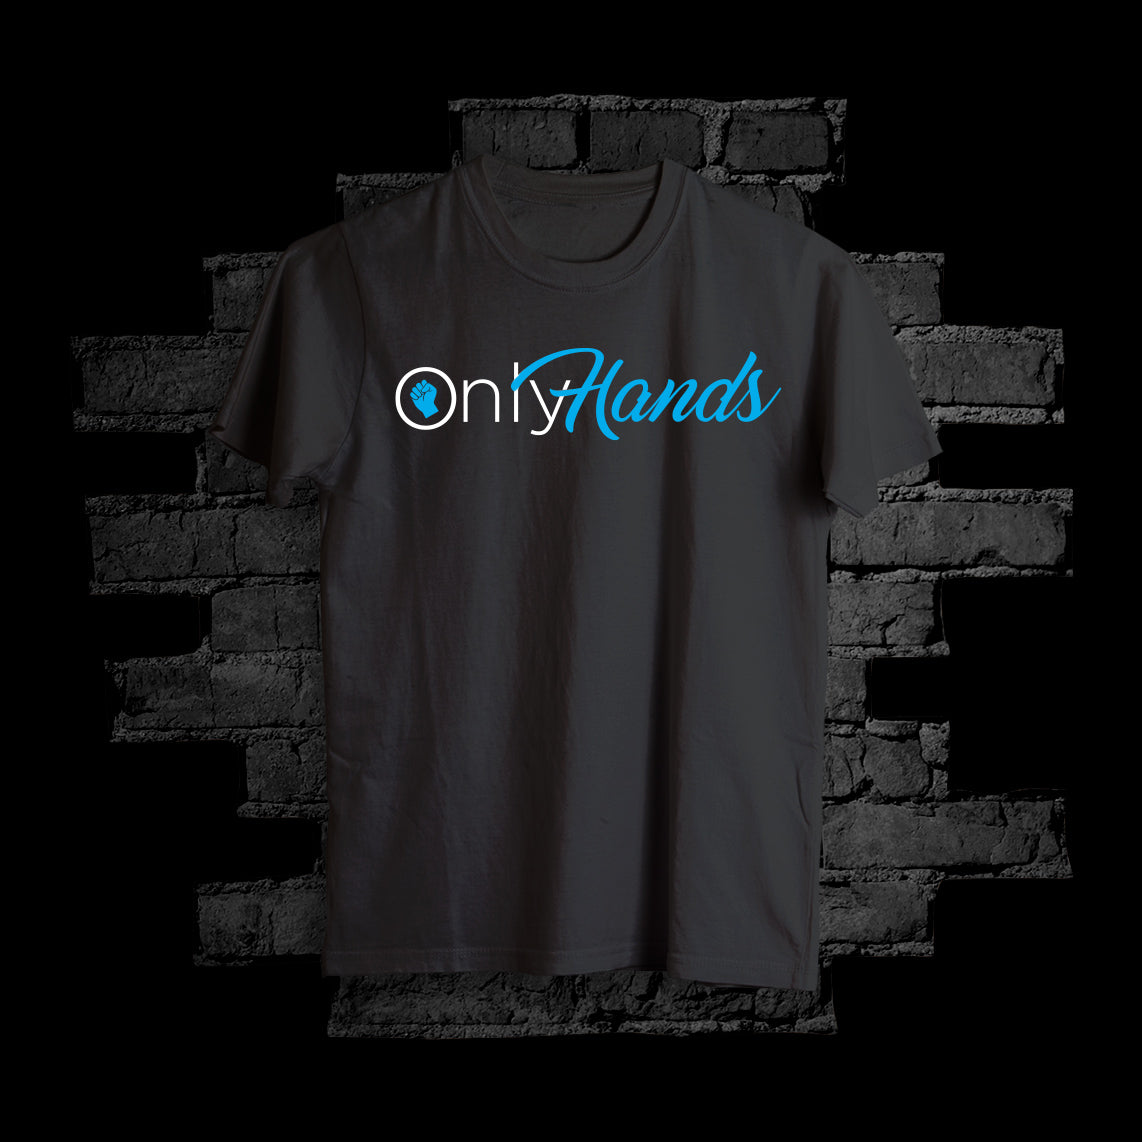 Only Hands Tee